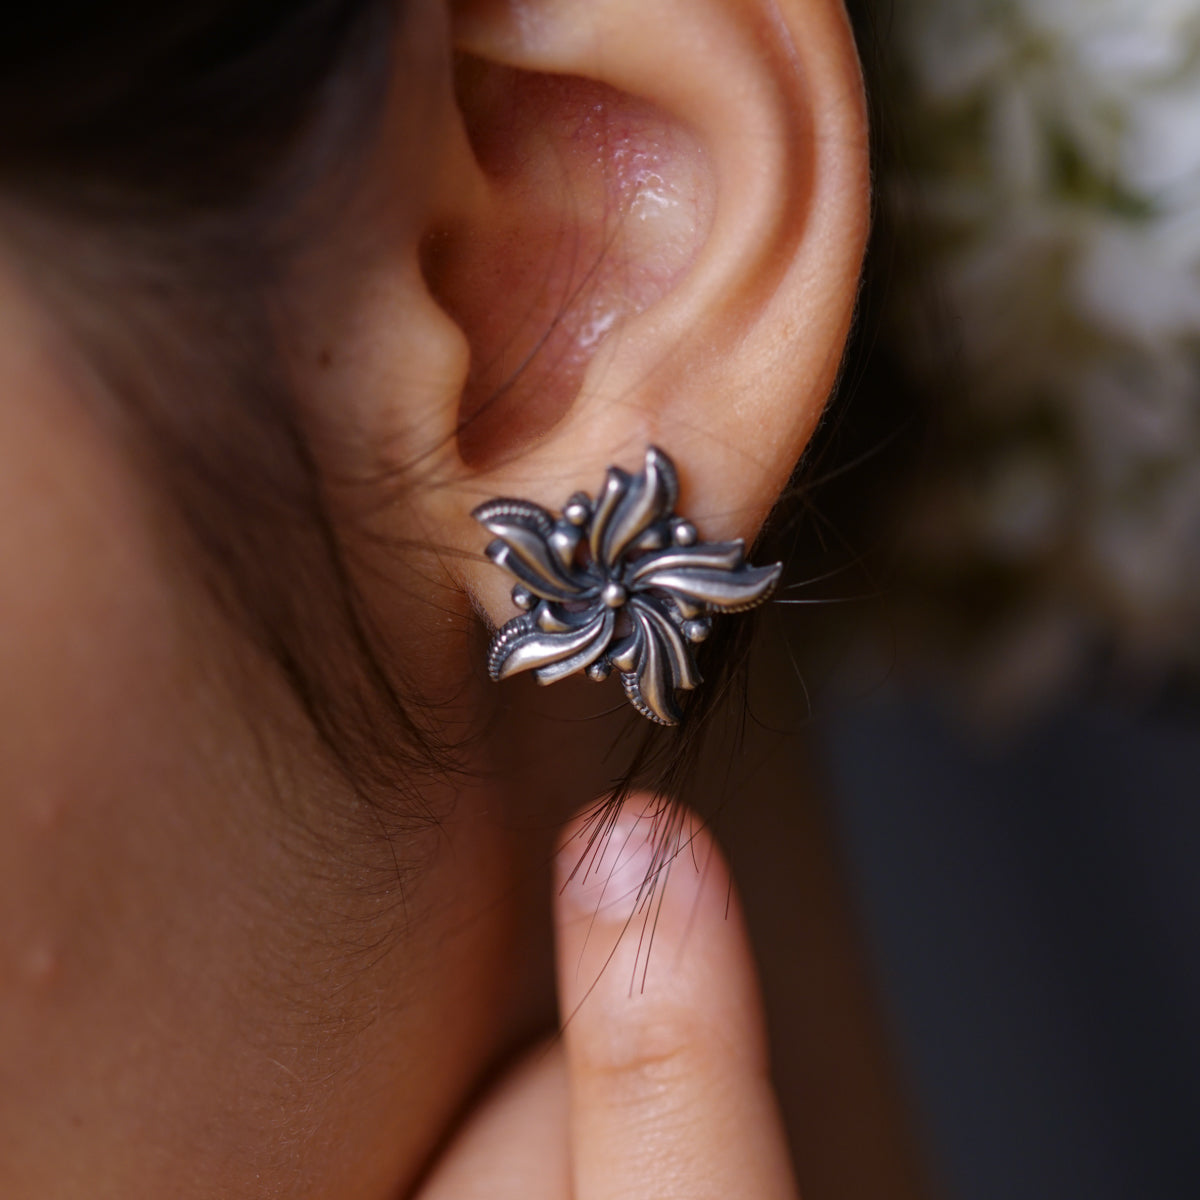 a close up of a person's ear with a flower on it